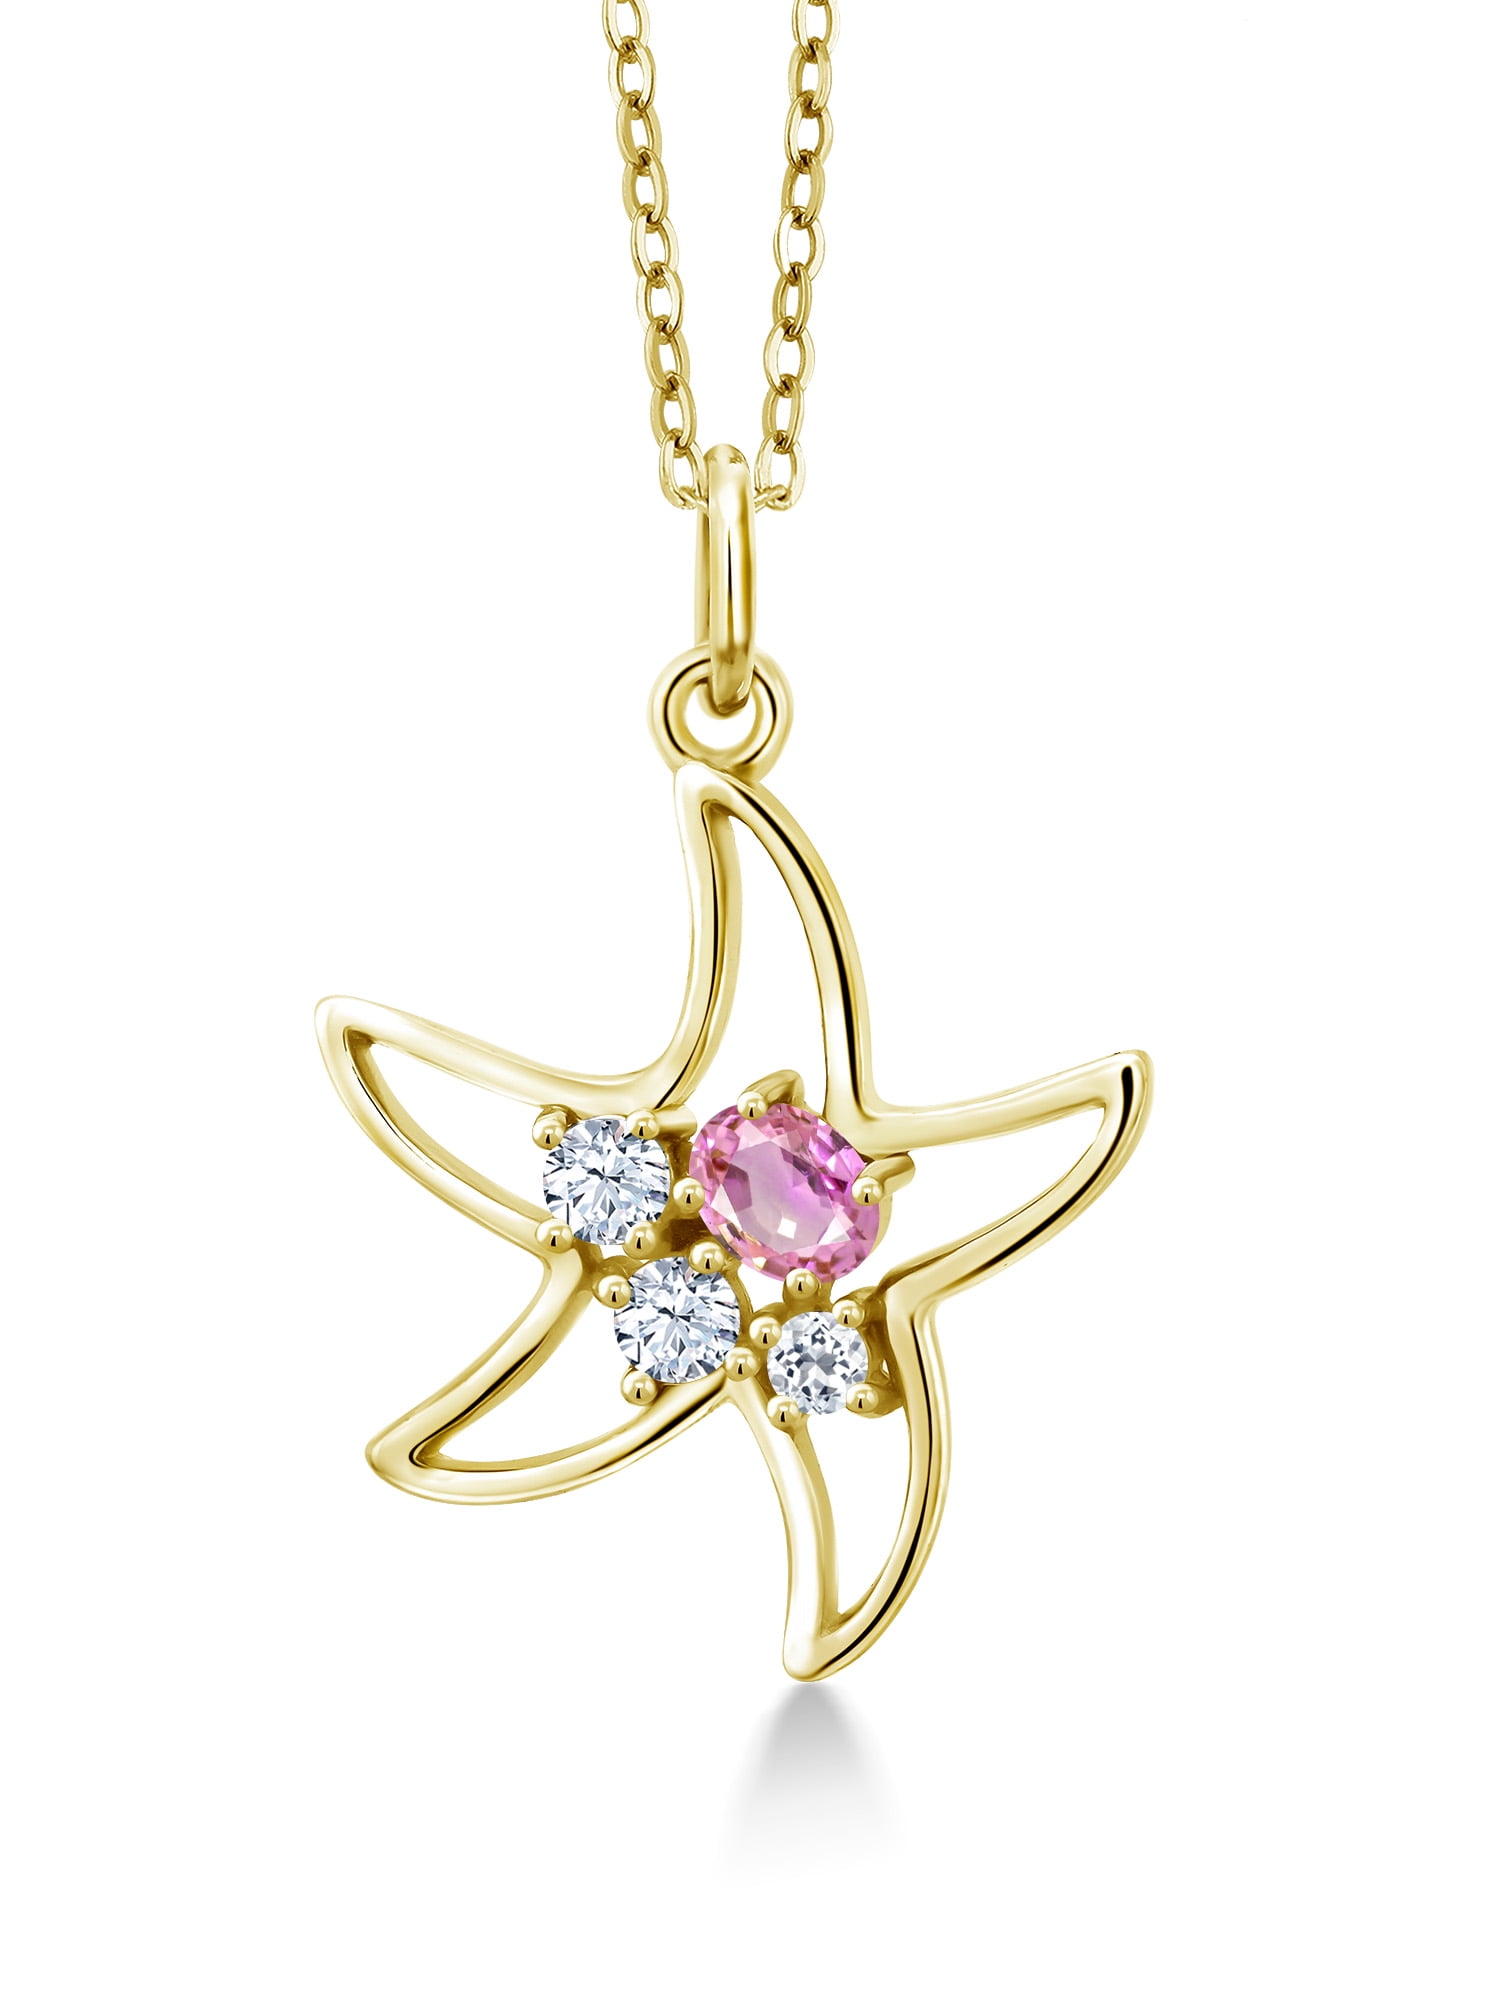 Gem Stone King 0.36 Ct Oval Yellow Sapphire 18K Yellow Gold Plated Silver Starfish Necklace 